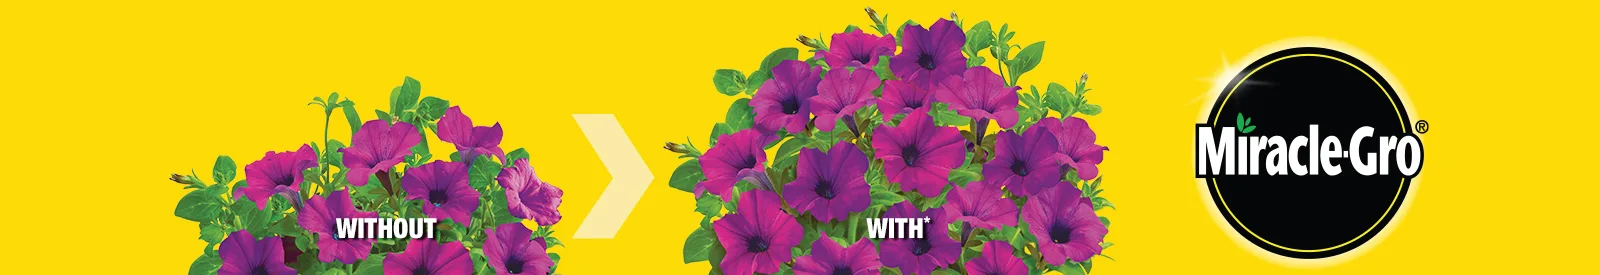 Miracle-Gro - Brand Page - Header Banner